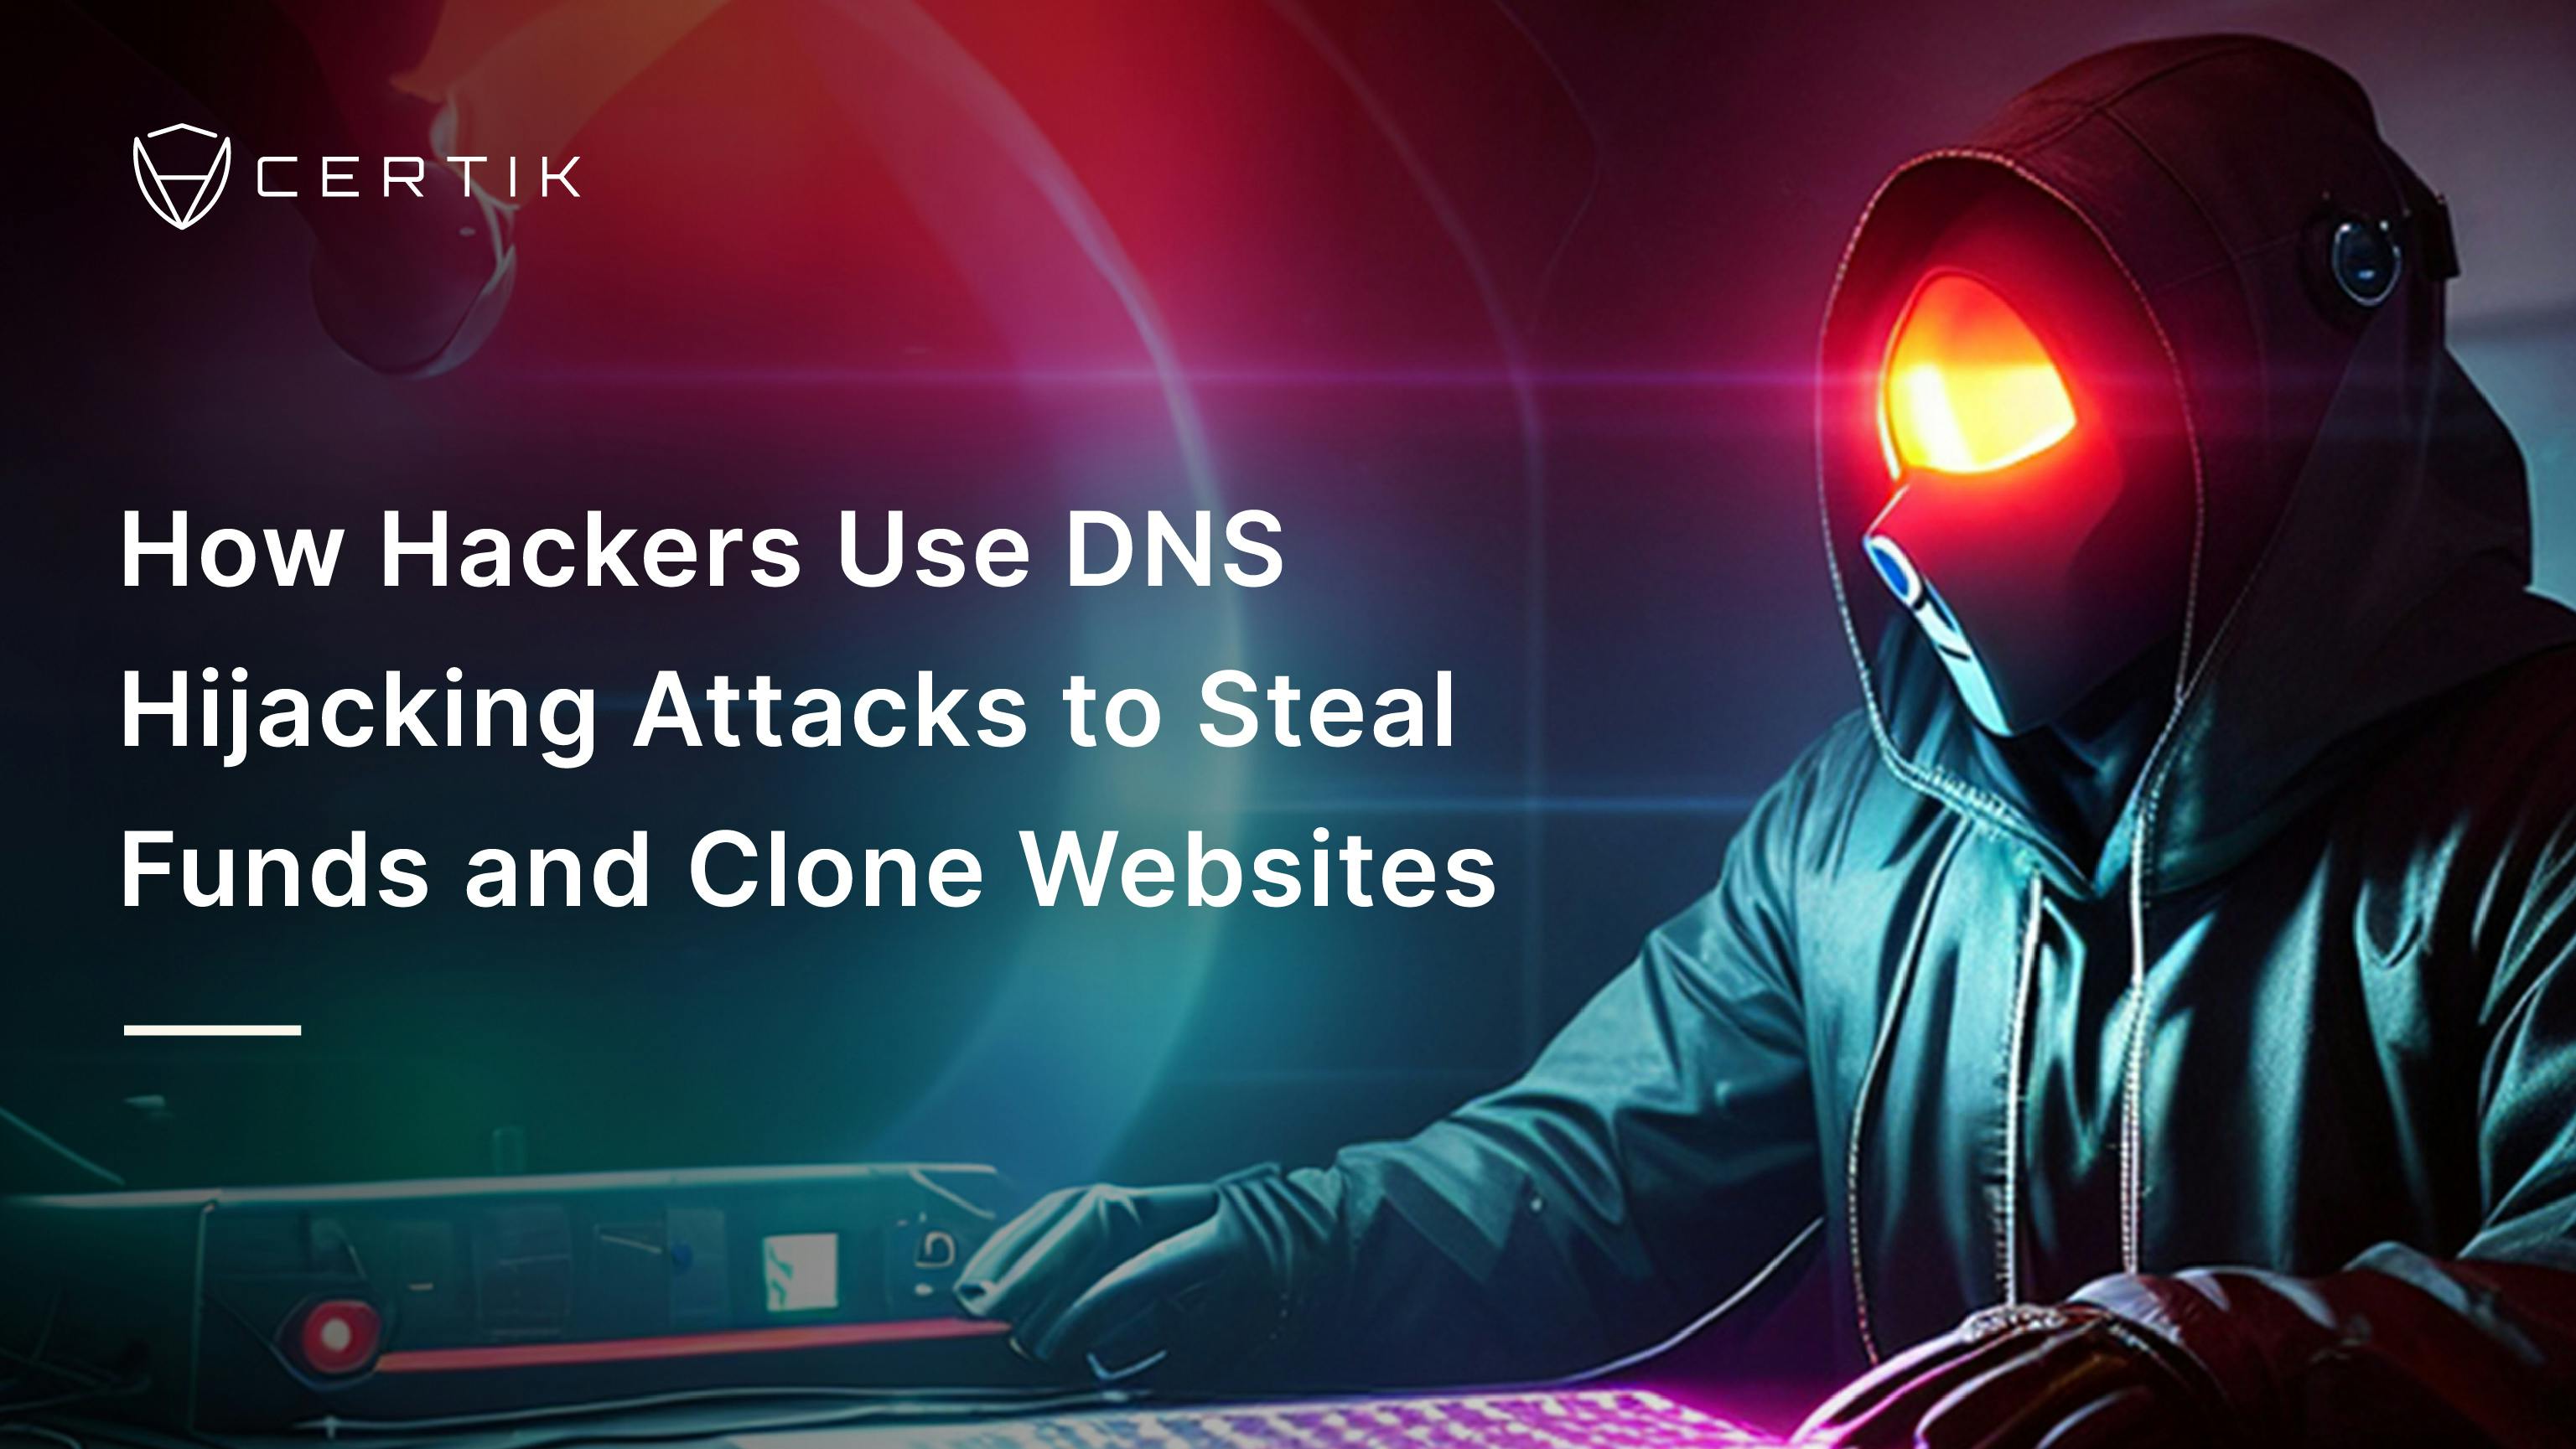 How Hackers Use DNS Hijacking Attacks to Steal Funds and Clone Websites